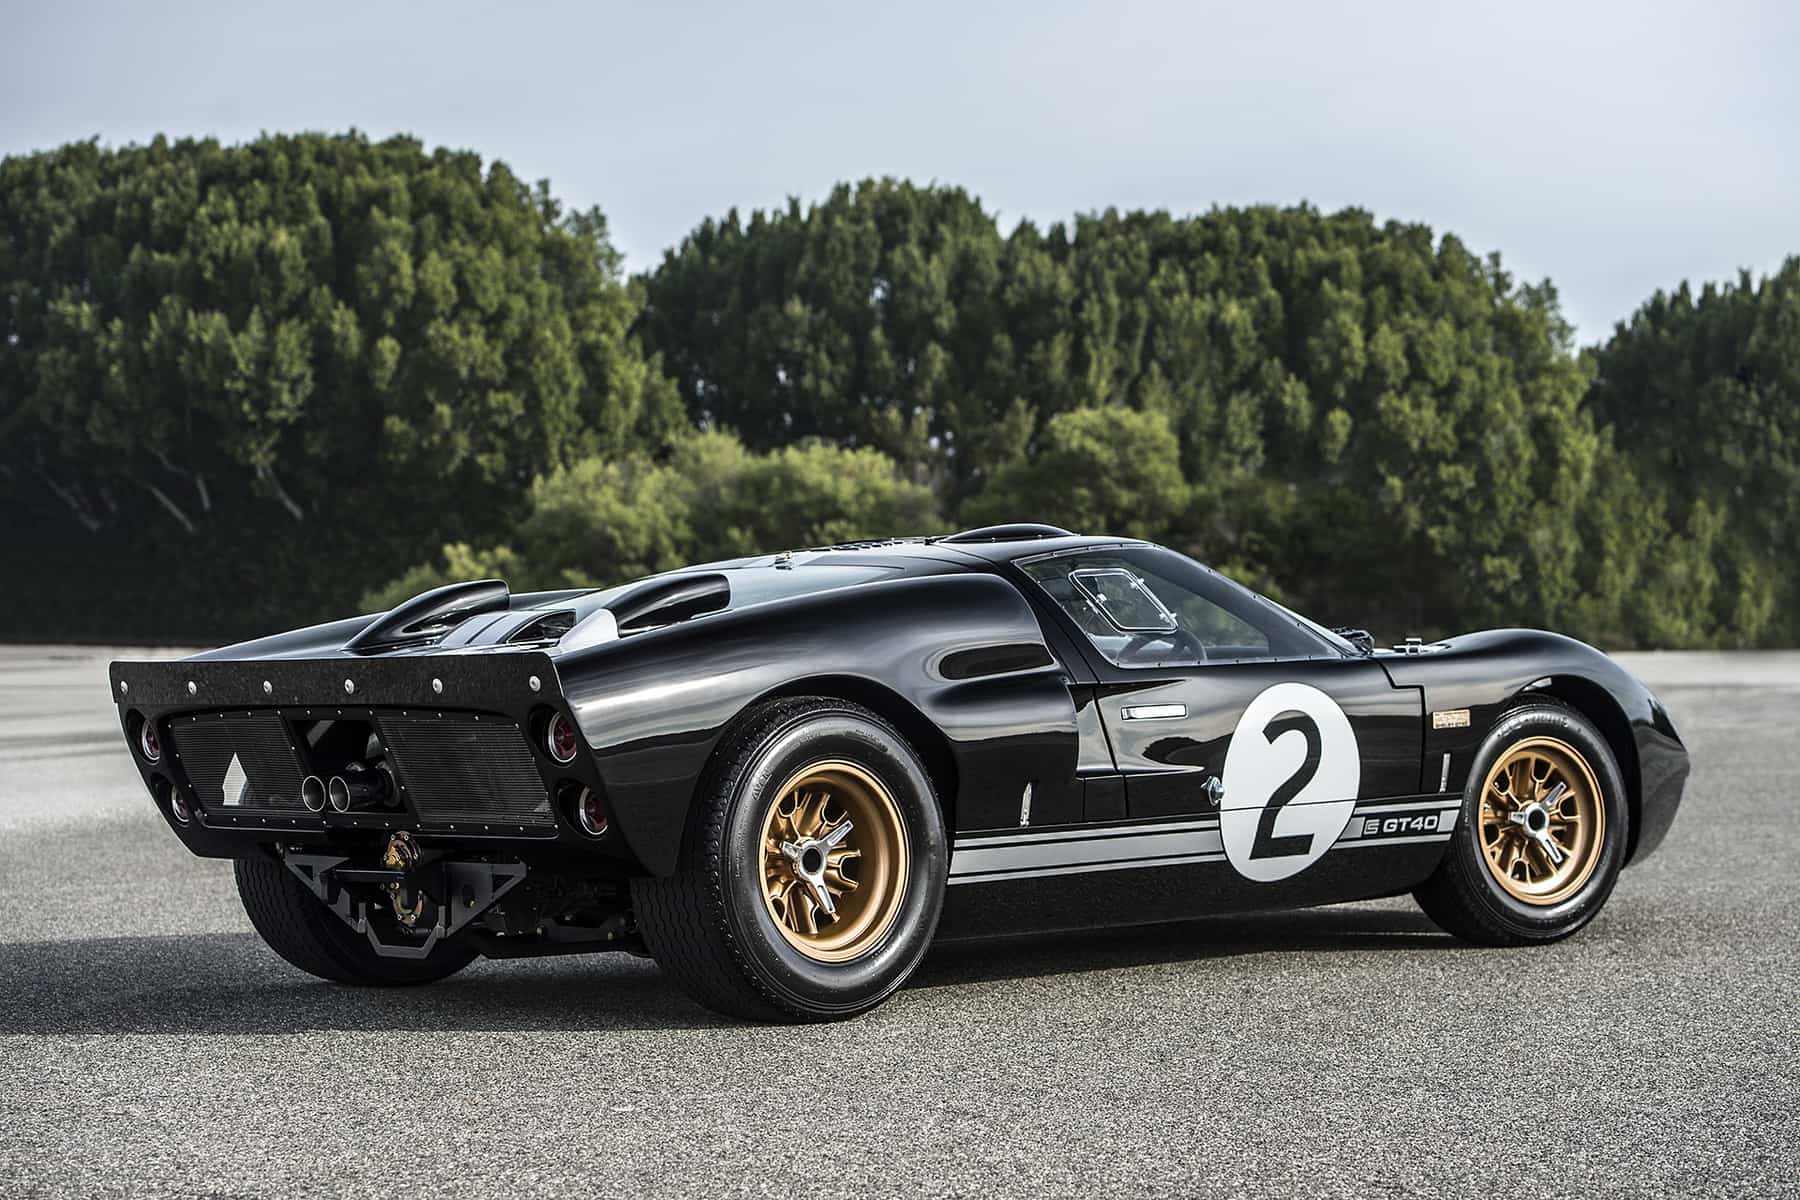 Ford-GT40-MKII-50th-Anniversary-Edition-10